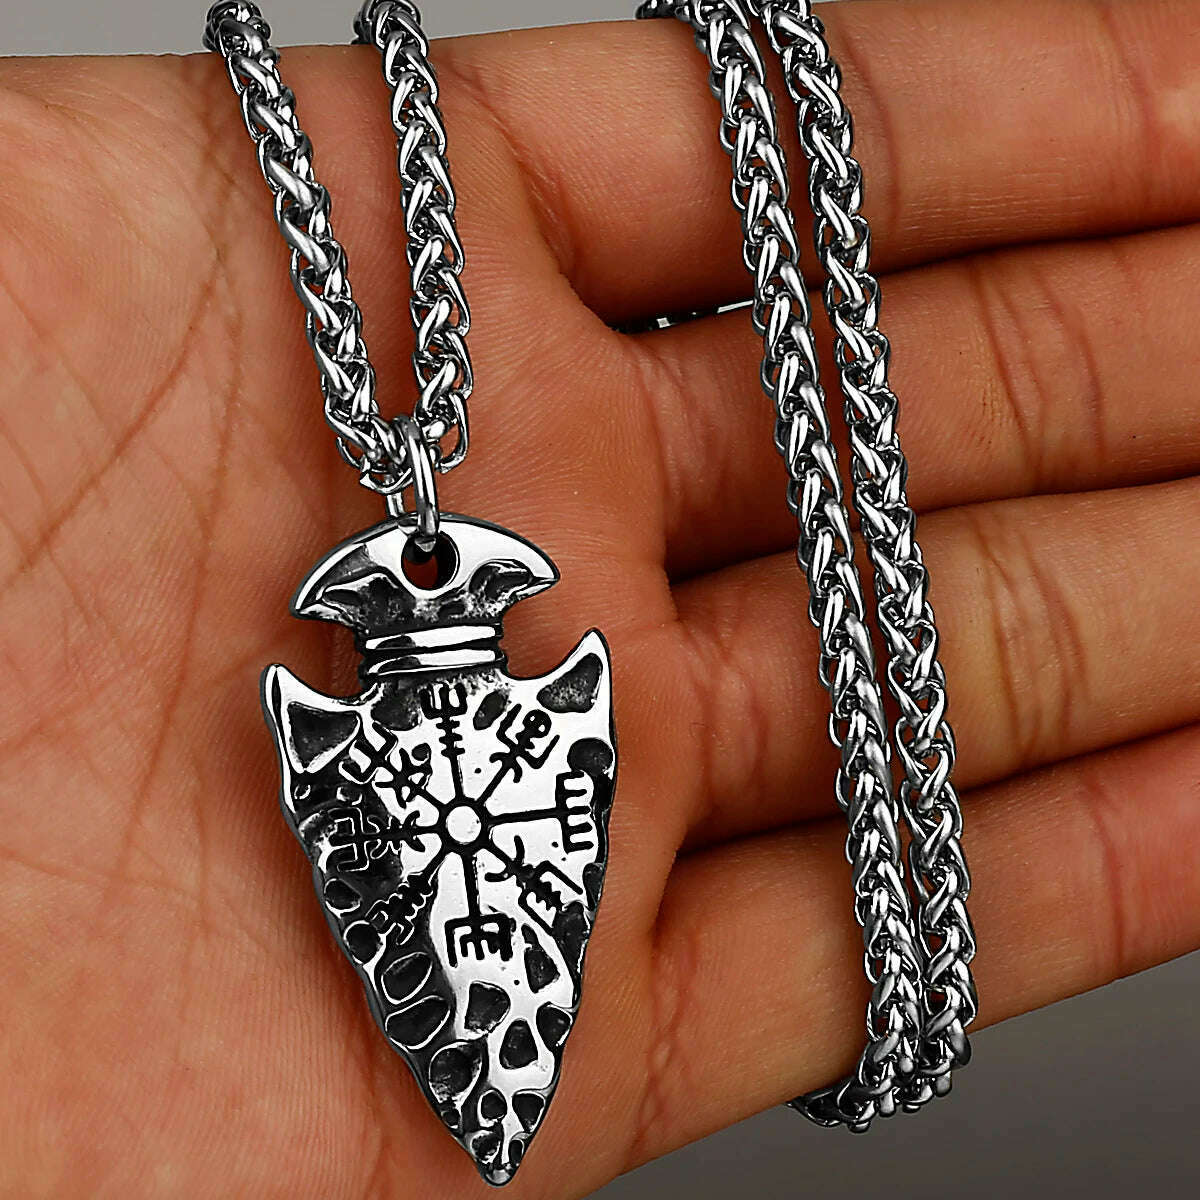 KIMLUD, Viking Vintage Spear Compass Necklace Viking Rune Men Amulet Pathfinder Vegvisir Stainless Steel Pendant Necklace Jewelry Gift, Pendant and chain 1, KIMLUD Womens Clothes